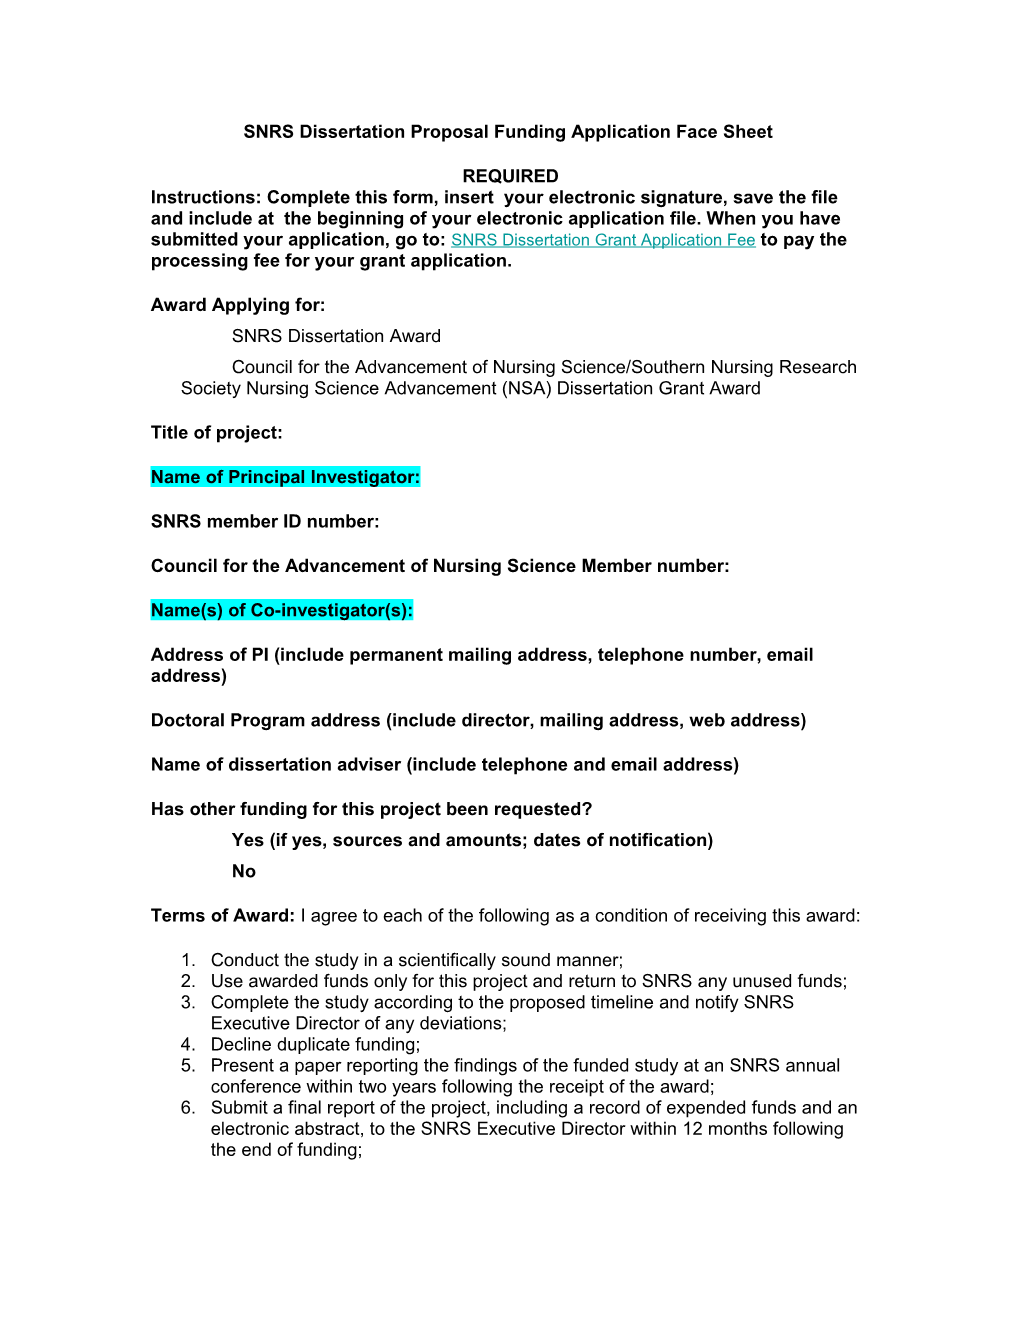 SNRS Dissertation Proposal Funding Application Face Sheet (Required)